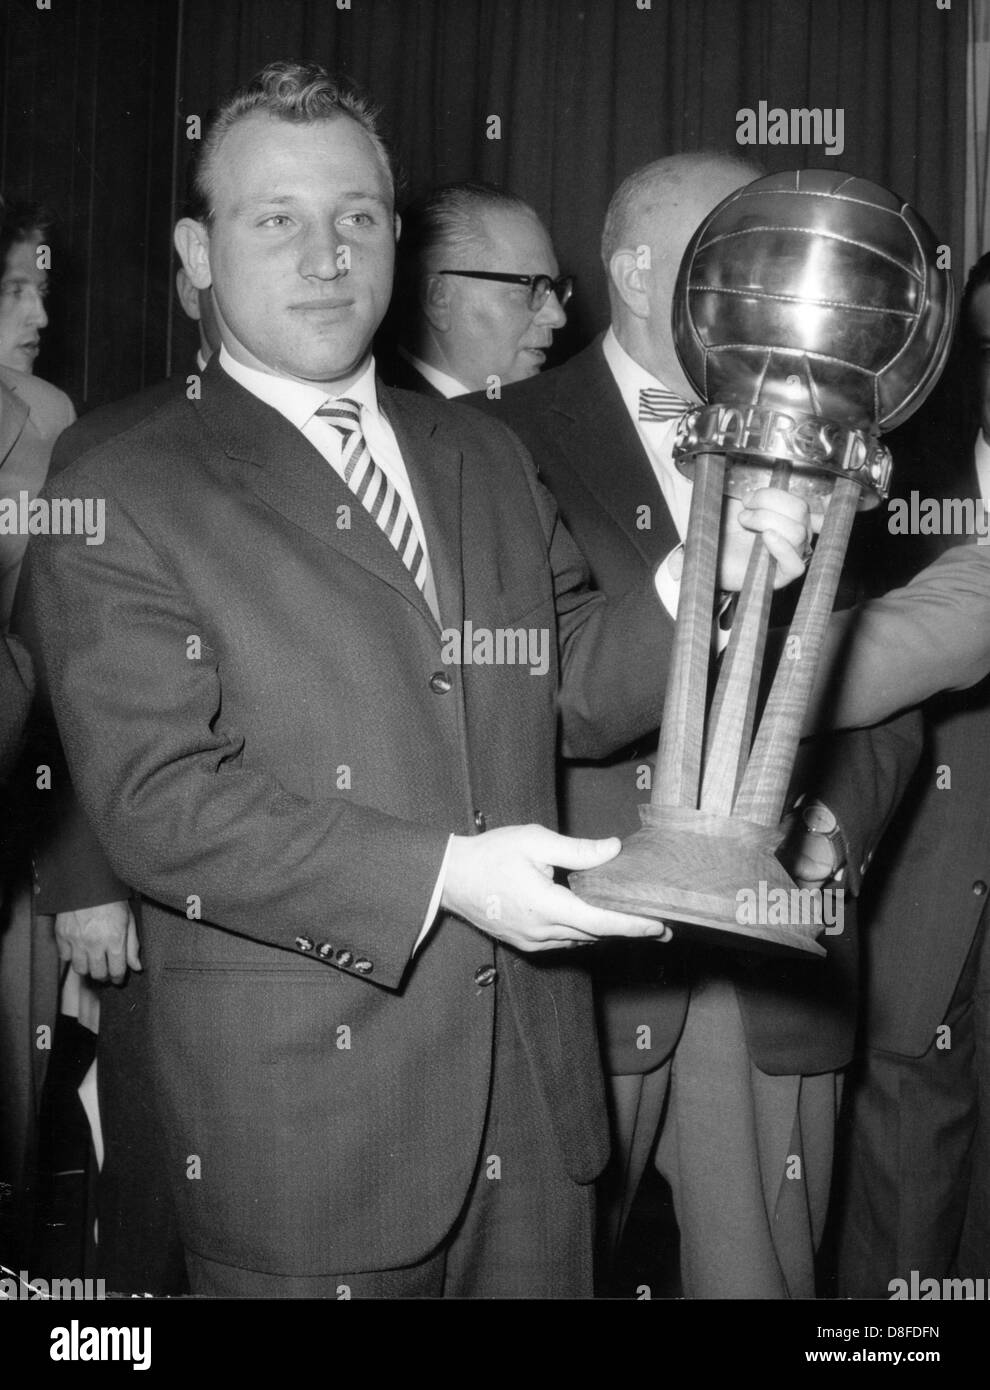 Striker of Hamburg Uwe Seeler is honoured as 'Footballer of the Year' with the 'Golden Football' in the Town Hall of Hamburg on the 29th of October in 1960.  +++(c) dpa - Report+++ Stock Photo